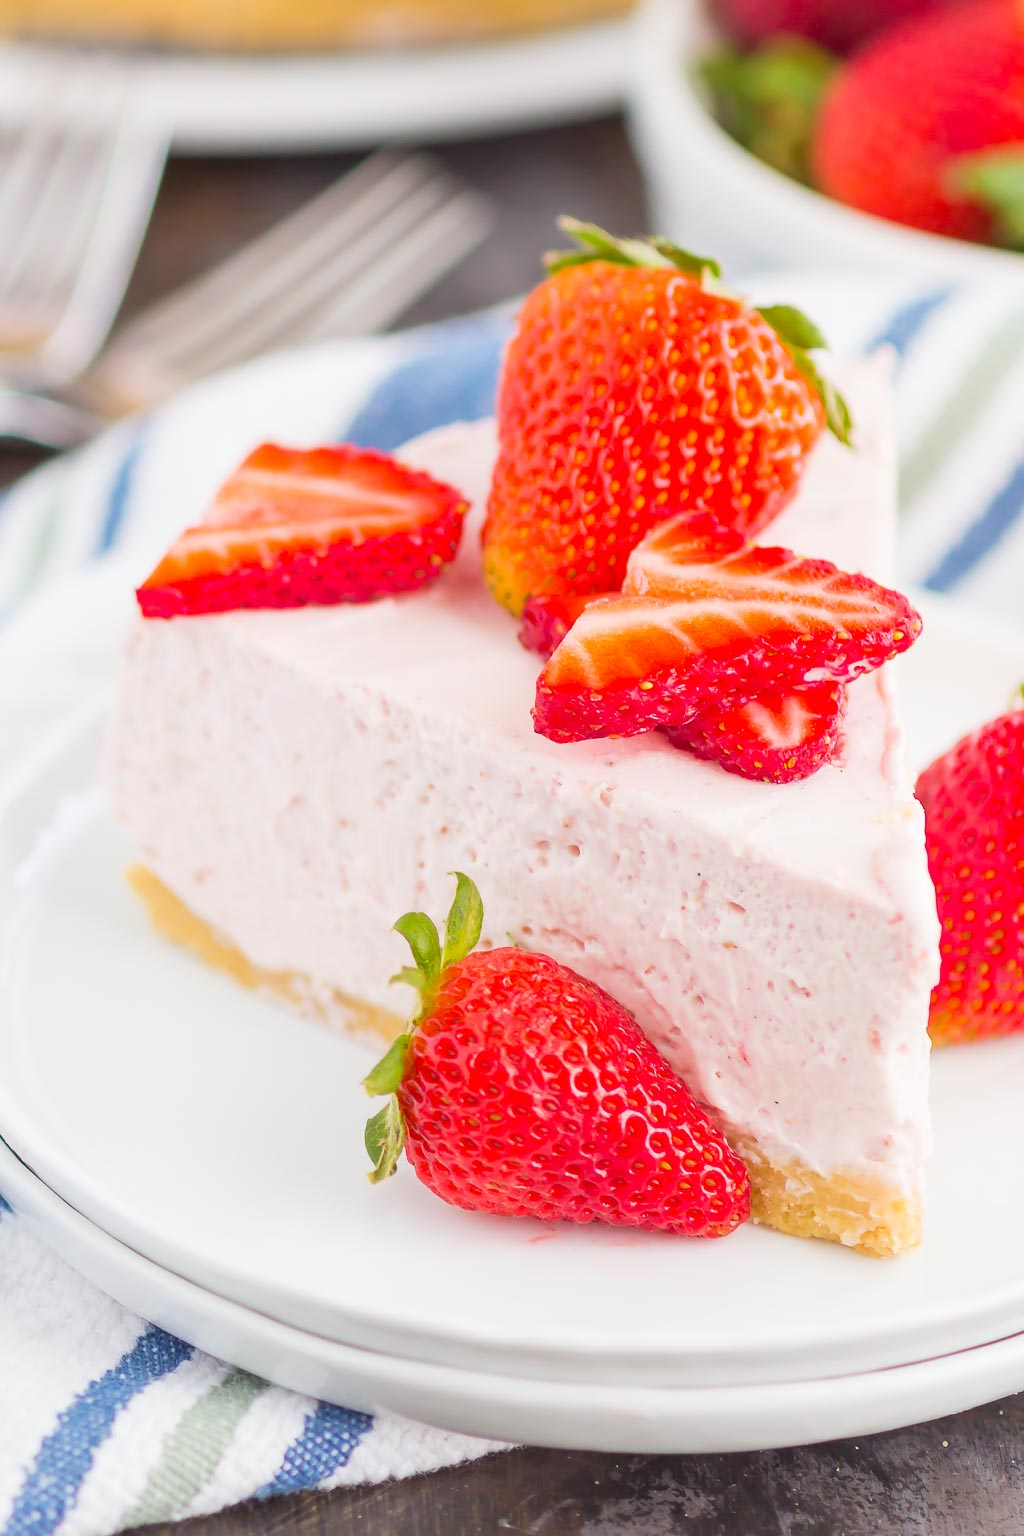 No Bake Strawberry Cheesecake is a simple dessert that's perfect for summer. A golden cookie crust is topped with a creamy strawberry cheesecake filling and then chilled to perfection. Easy to make and with no oven required, this decadent cake makes the most delicious treat!